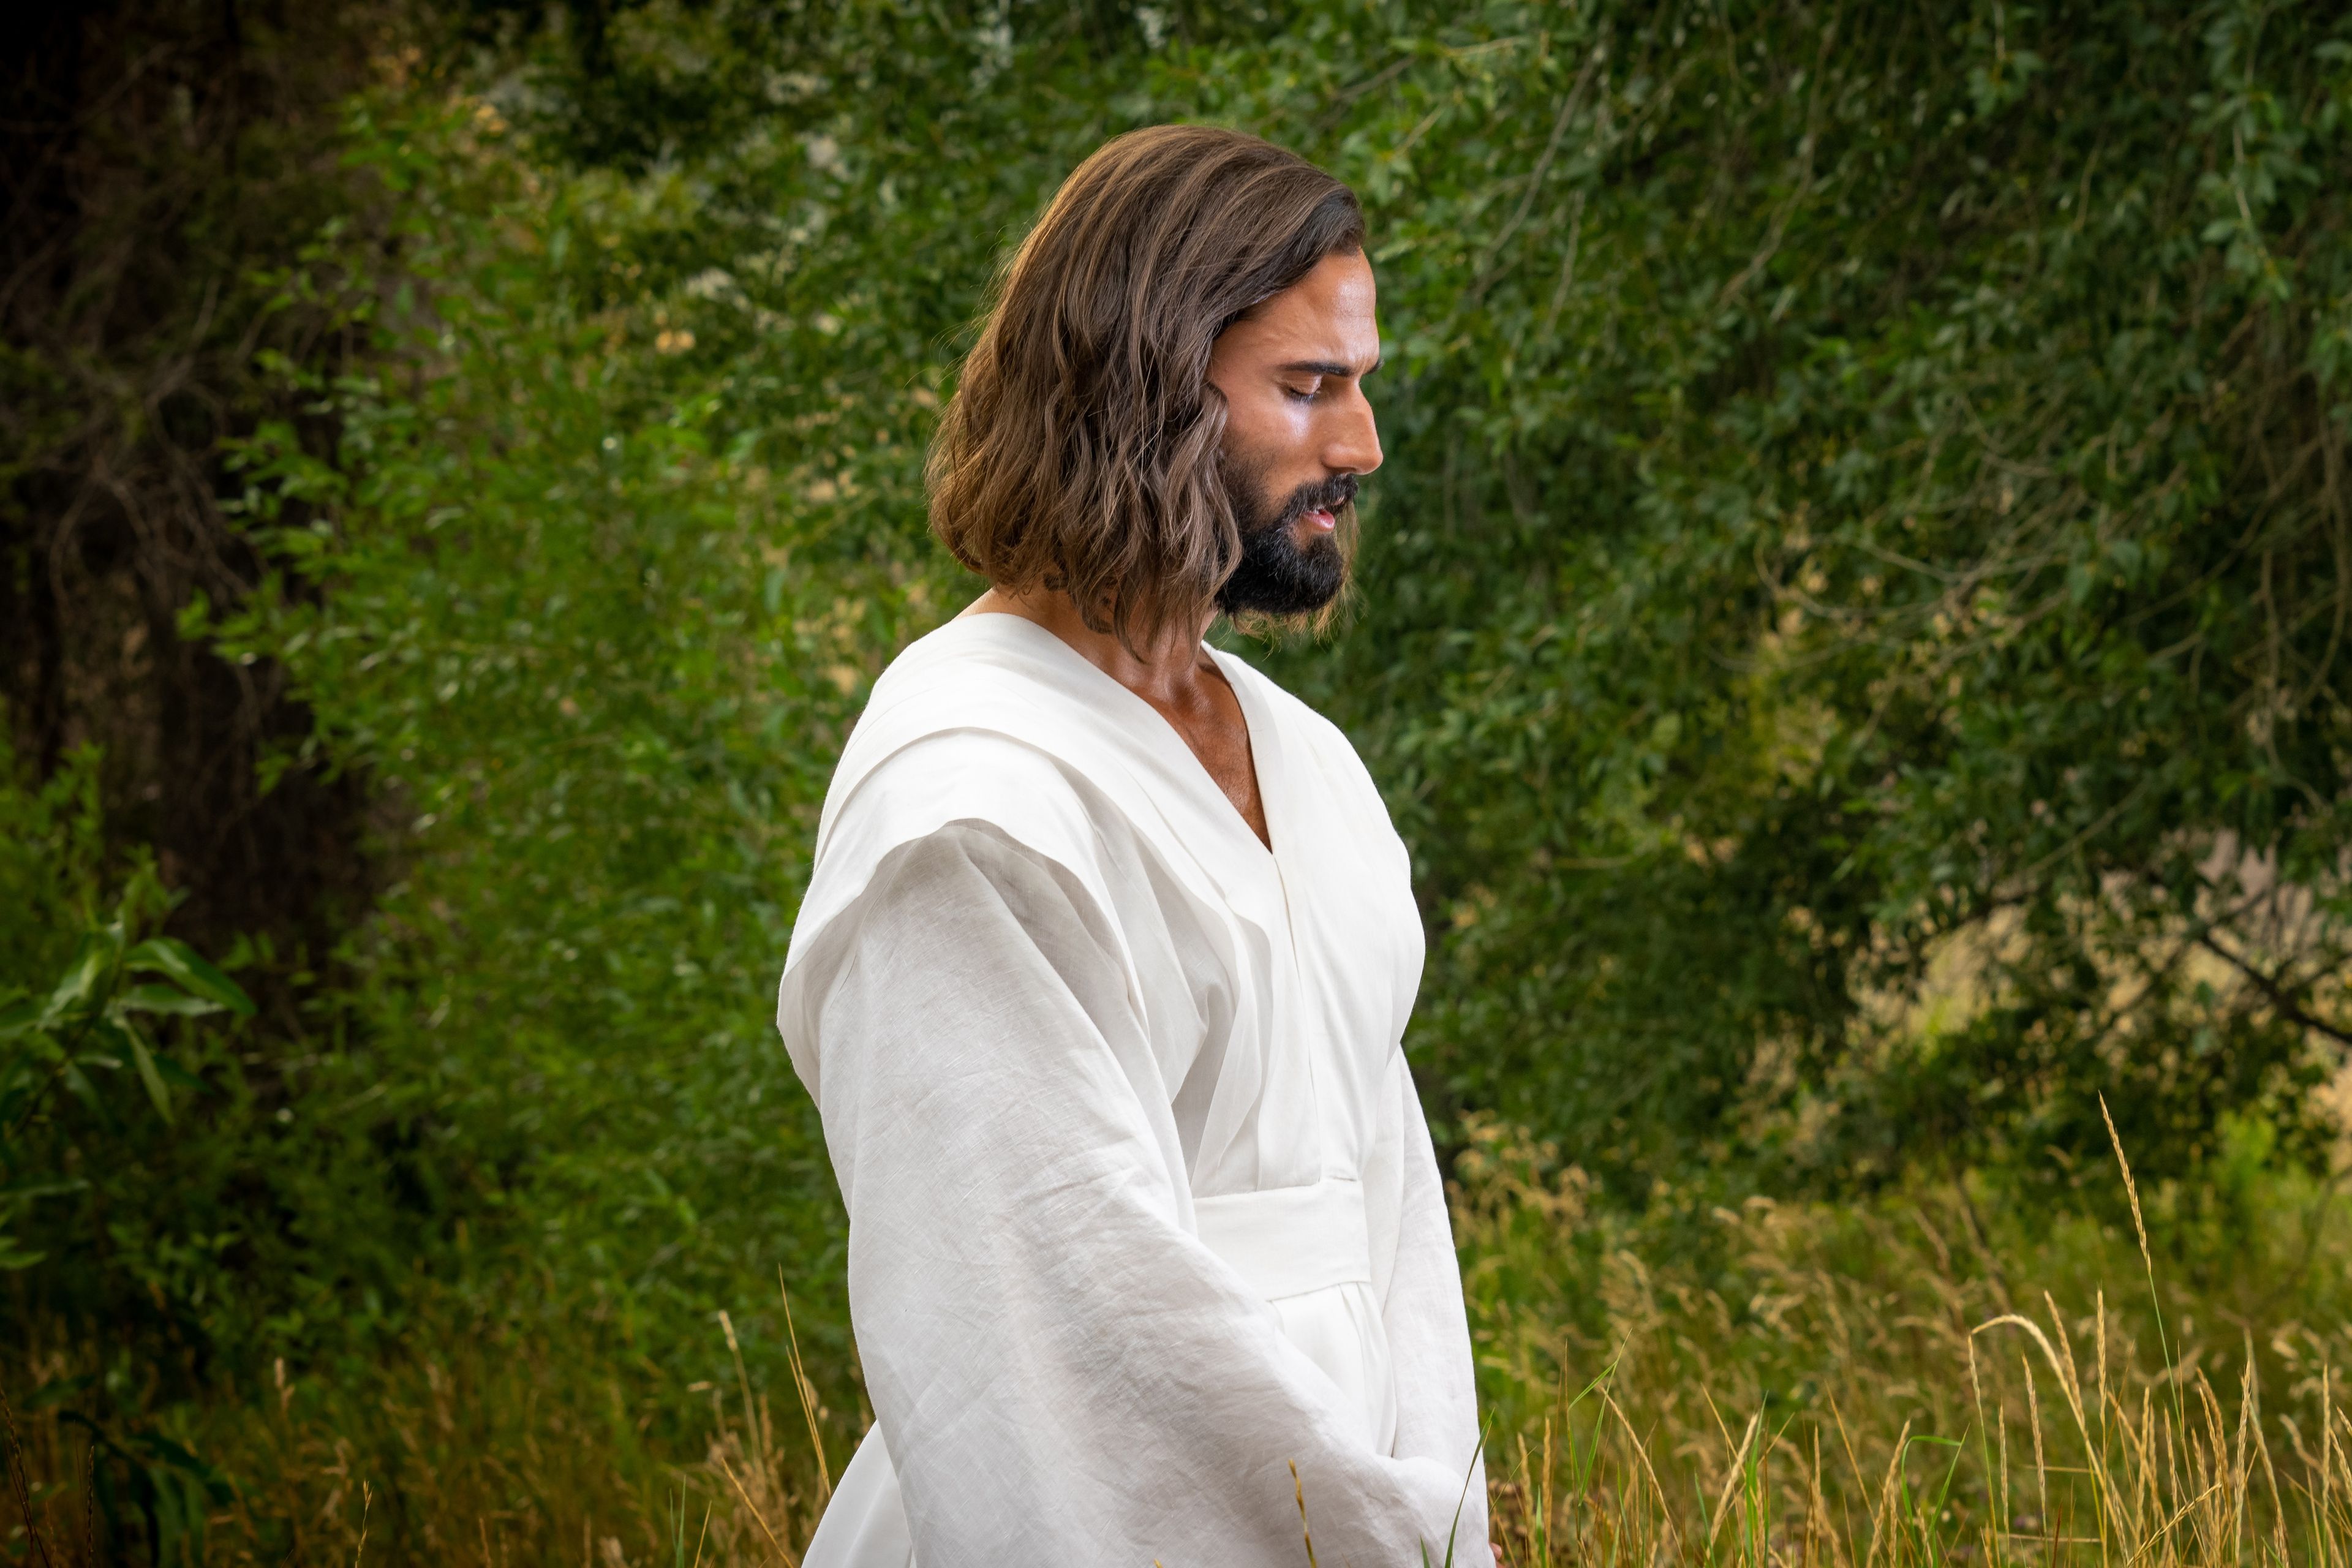 Jesus Christ takes a moment after teaching the Nephites to go pray.